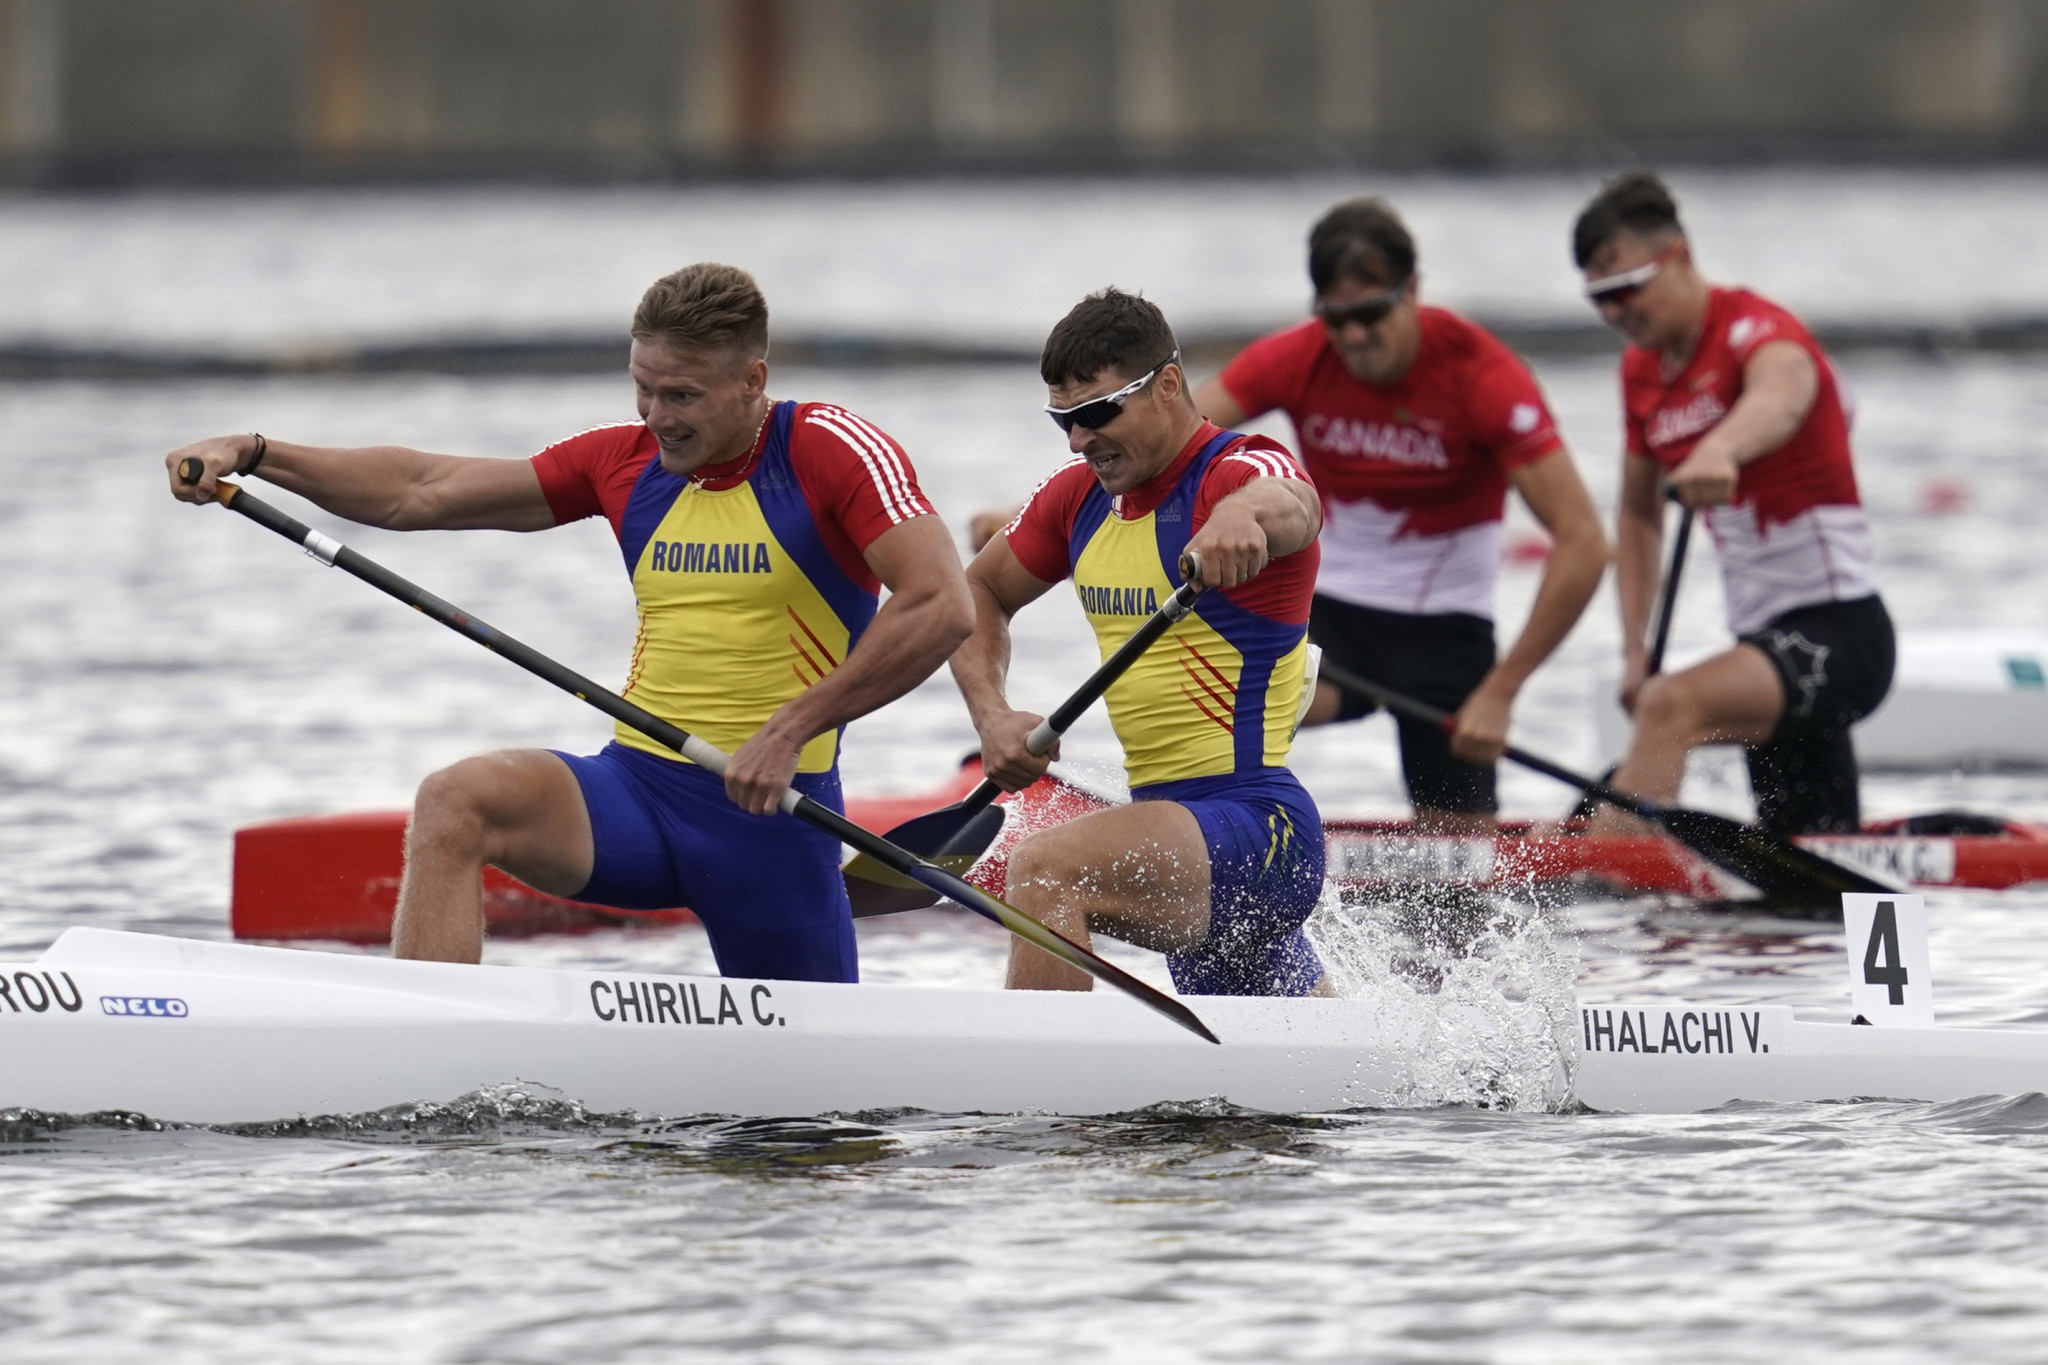 The ICF says it will continue implementing its coronavirus contingency plans to deal with the cancellation and postponement of Tokyo 2020 sprint, slalom and Para-canoe qualifying events ©Getty Images